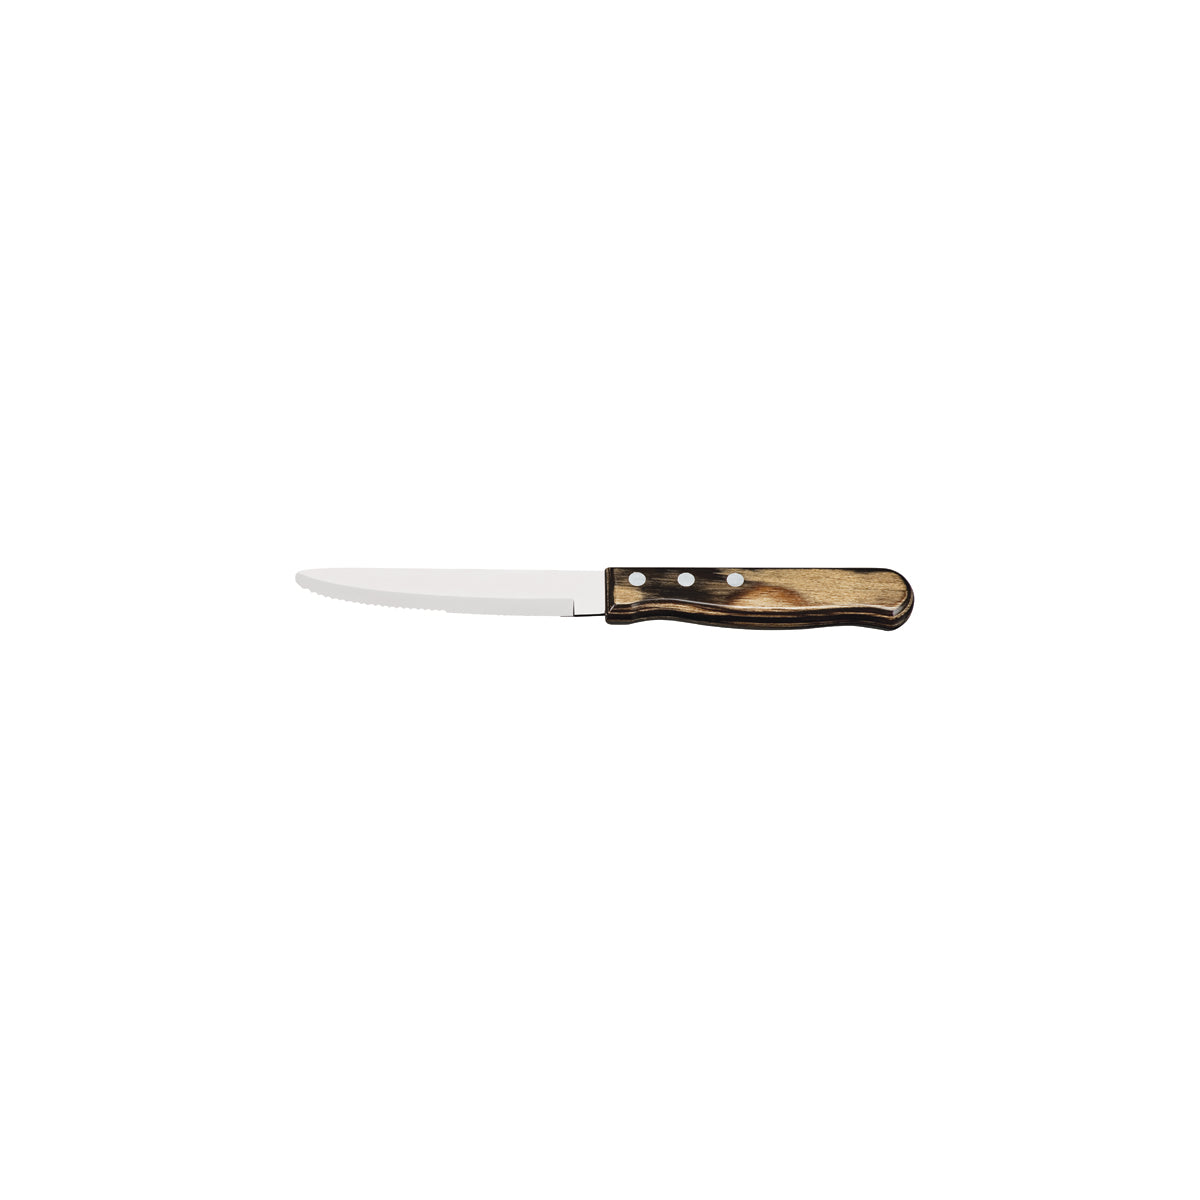 TM38299/005 Tramontina Churrasco Steak Knife Serrated Wide Blade with Polywood Handle Brown 152mm With Reverse Logo Tomkin Australia Hospitality Supplies